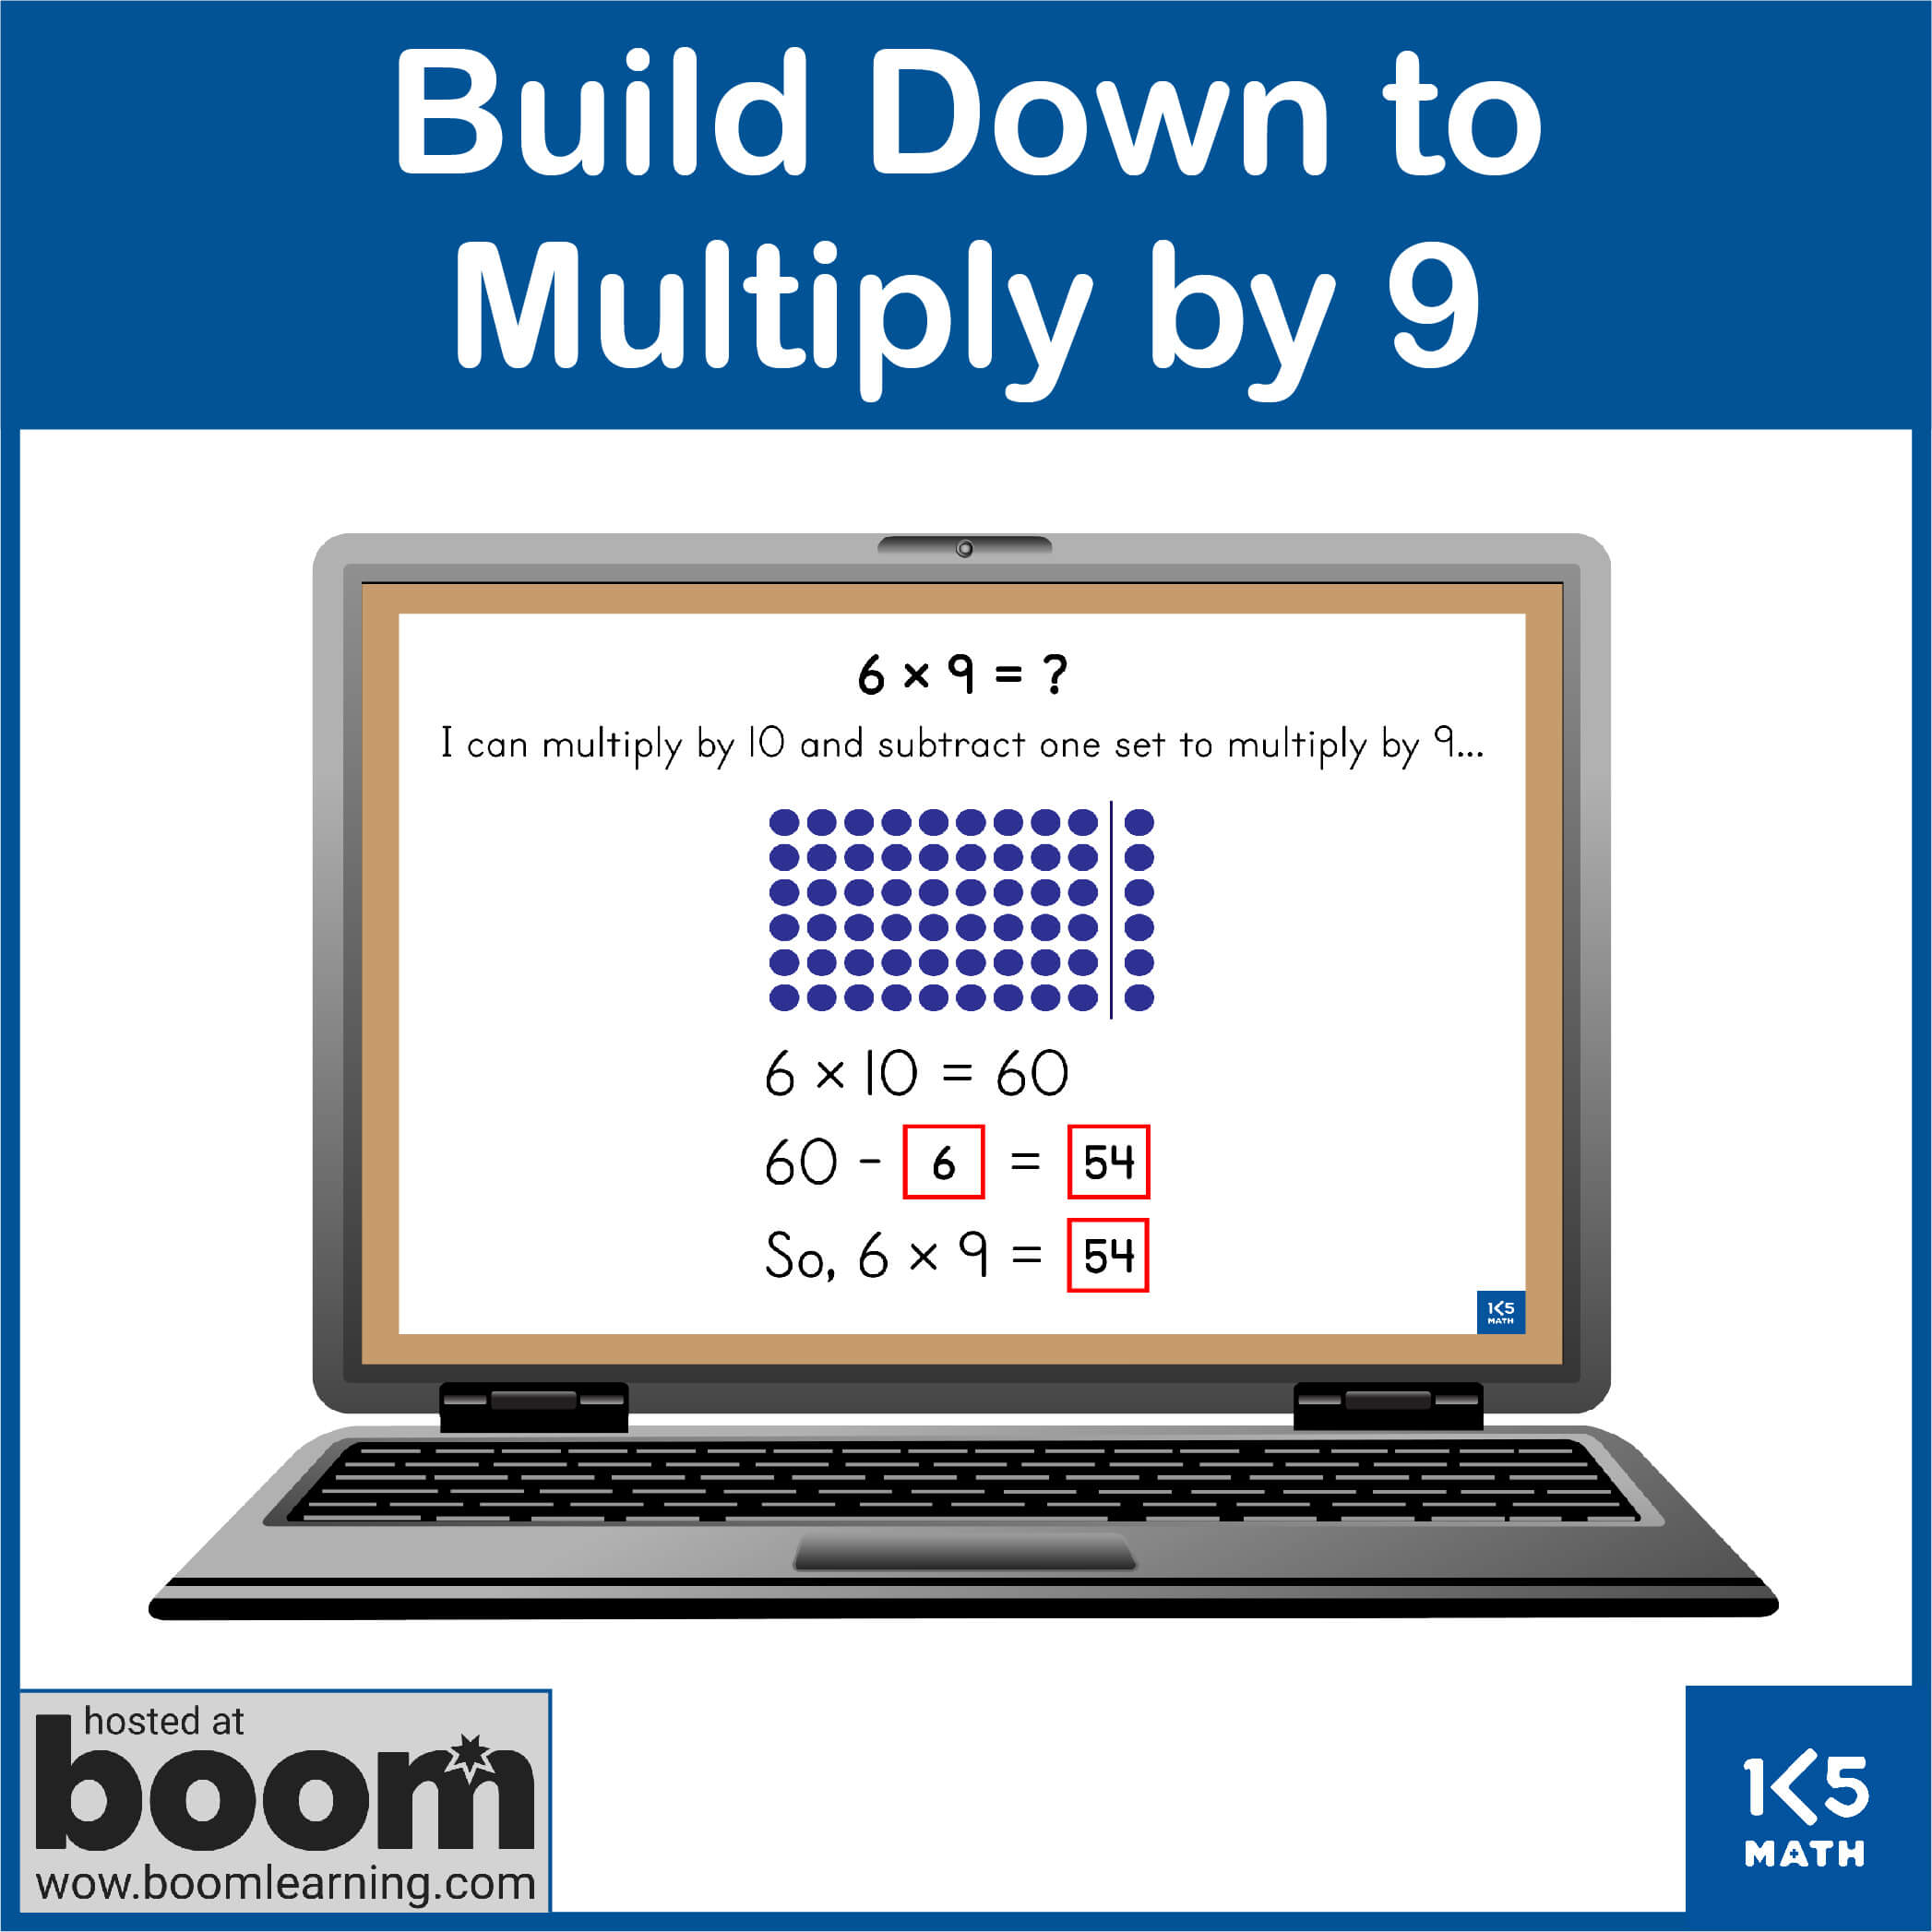 Build Down to Multiply by 9